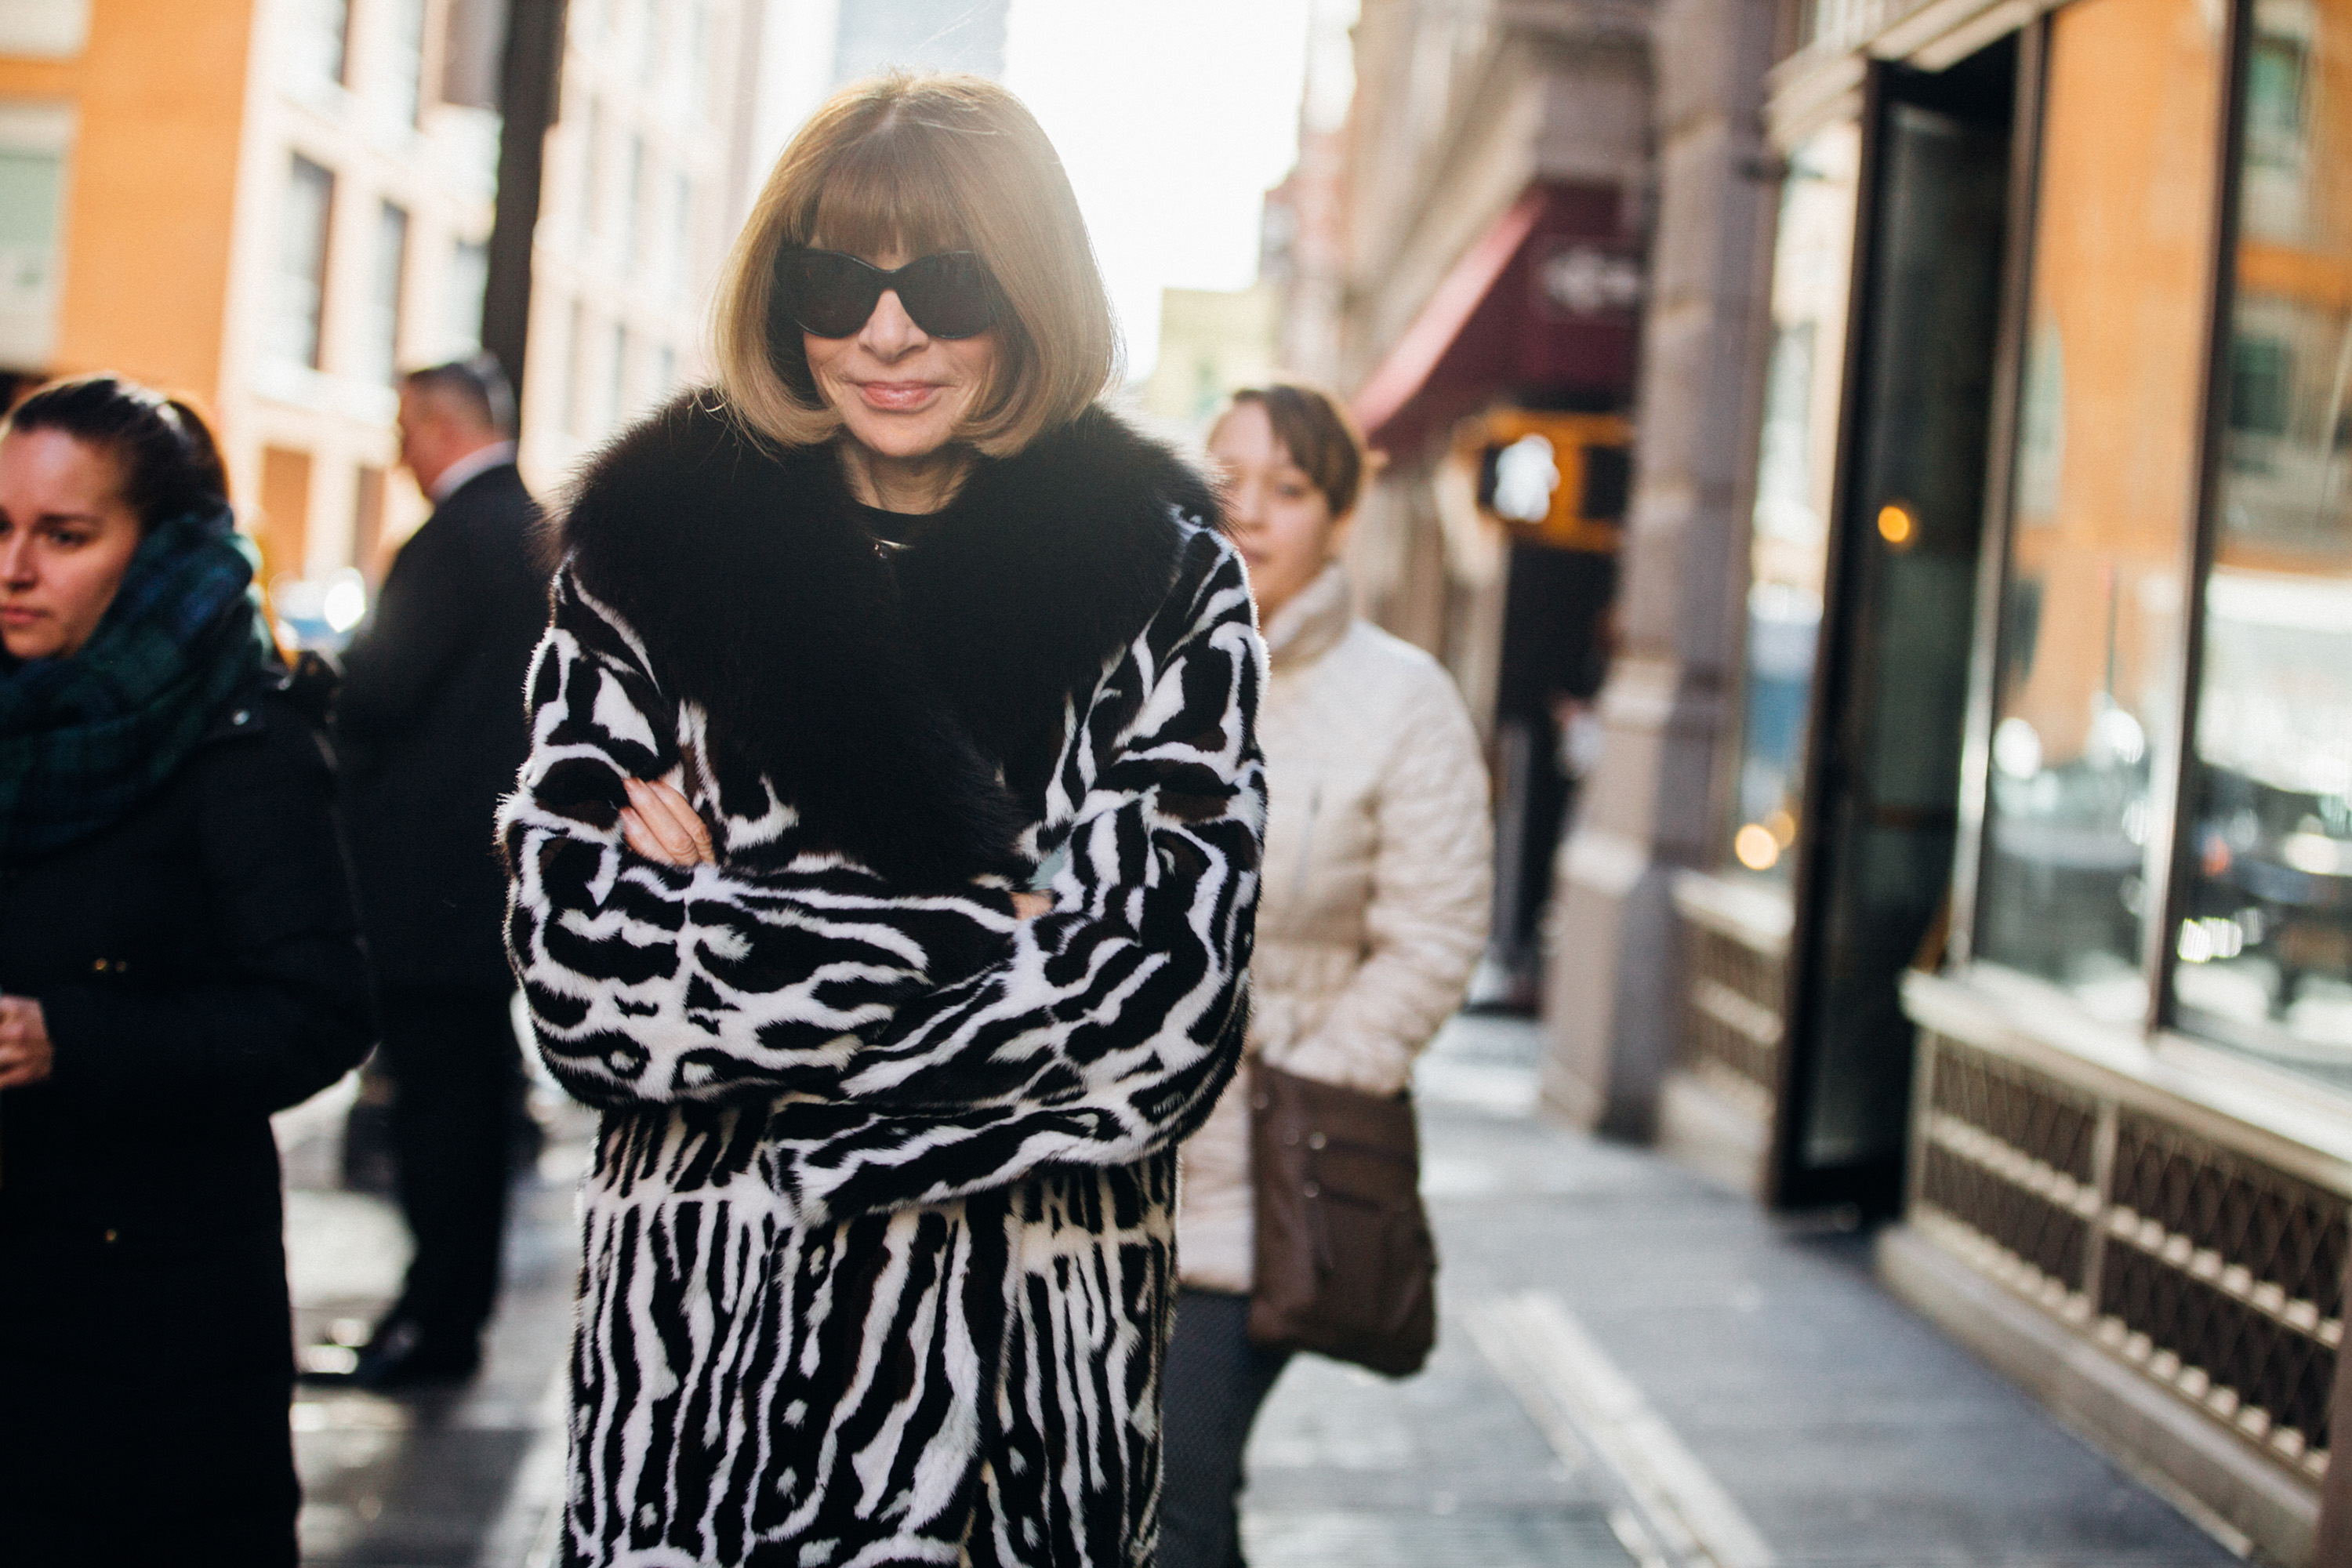 NEW YORK, NY - JANUARY 11:  Anna Wintour wears a zebra fur jacket outside the Valentino Pre-Fall 2017 Fashion Show at Beekman Hotel on January 11, 2017 in New York City.  (Photo by Melodie Jeng/WireImage) (Melodie Jeng—WireImage)